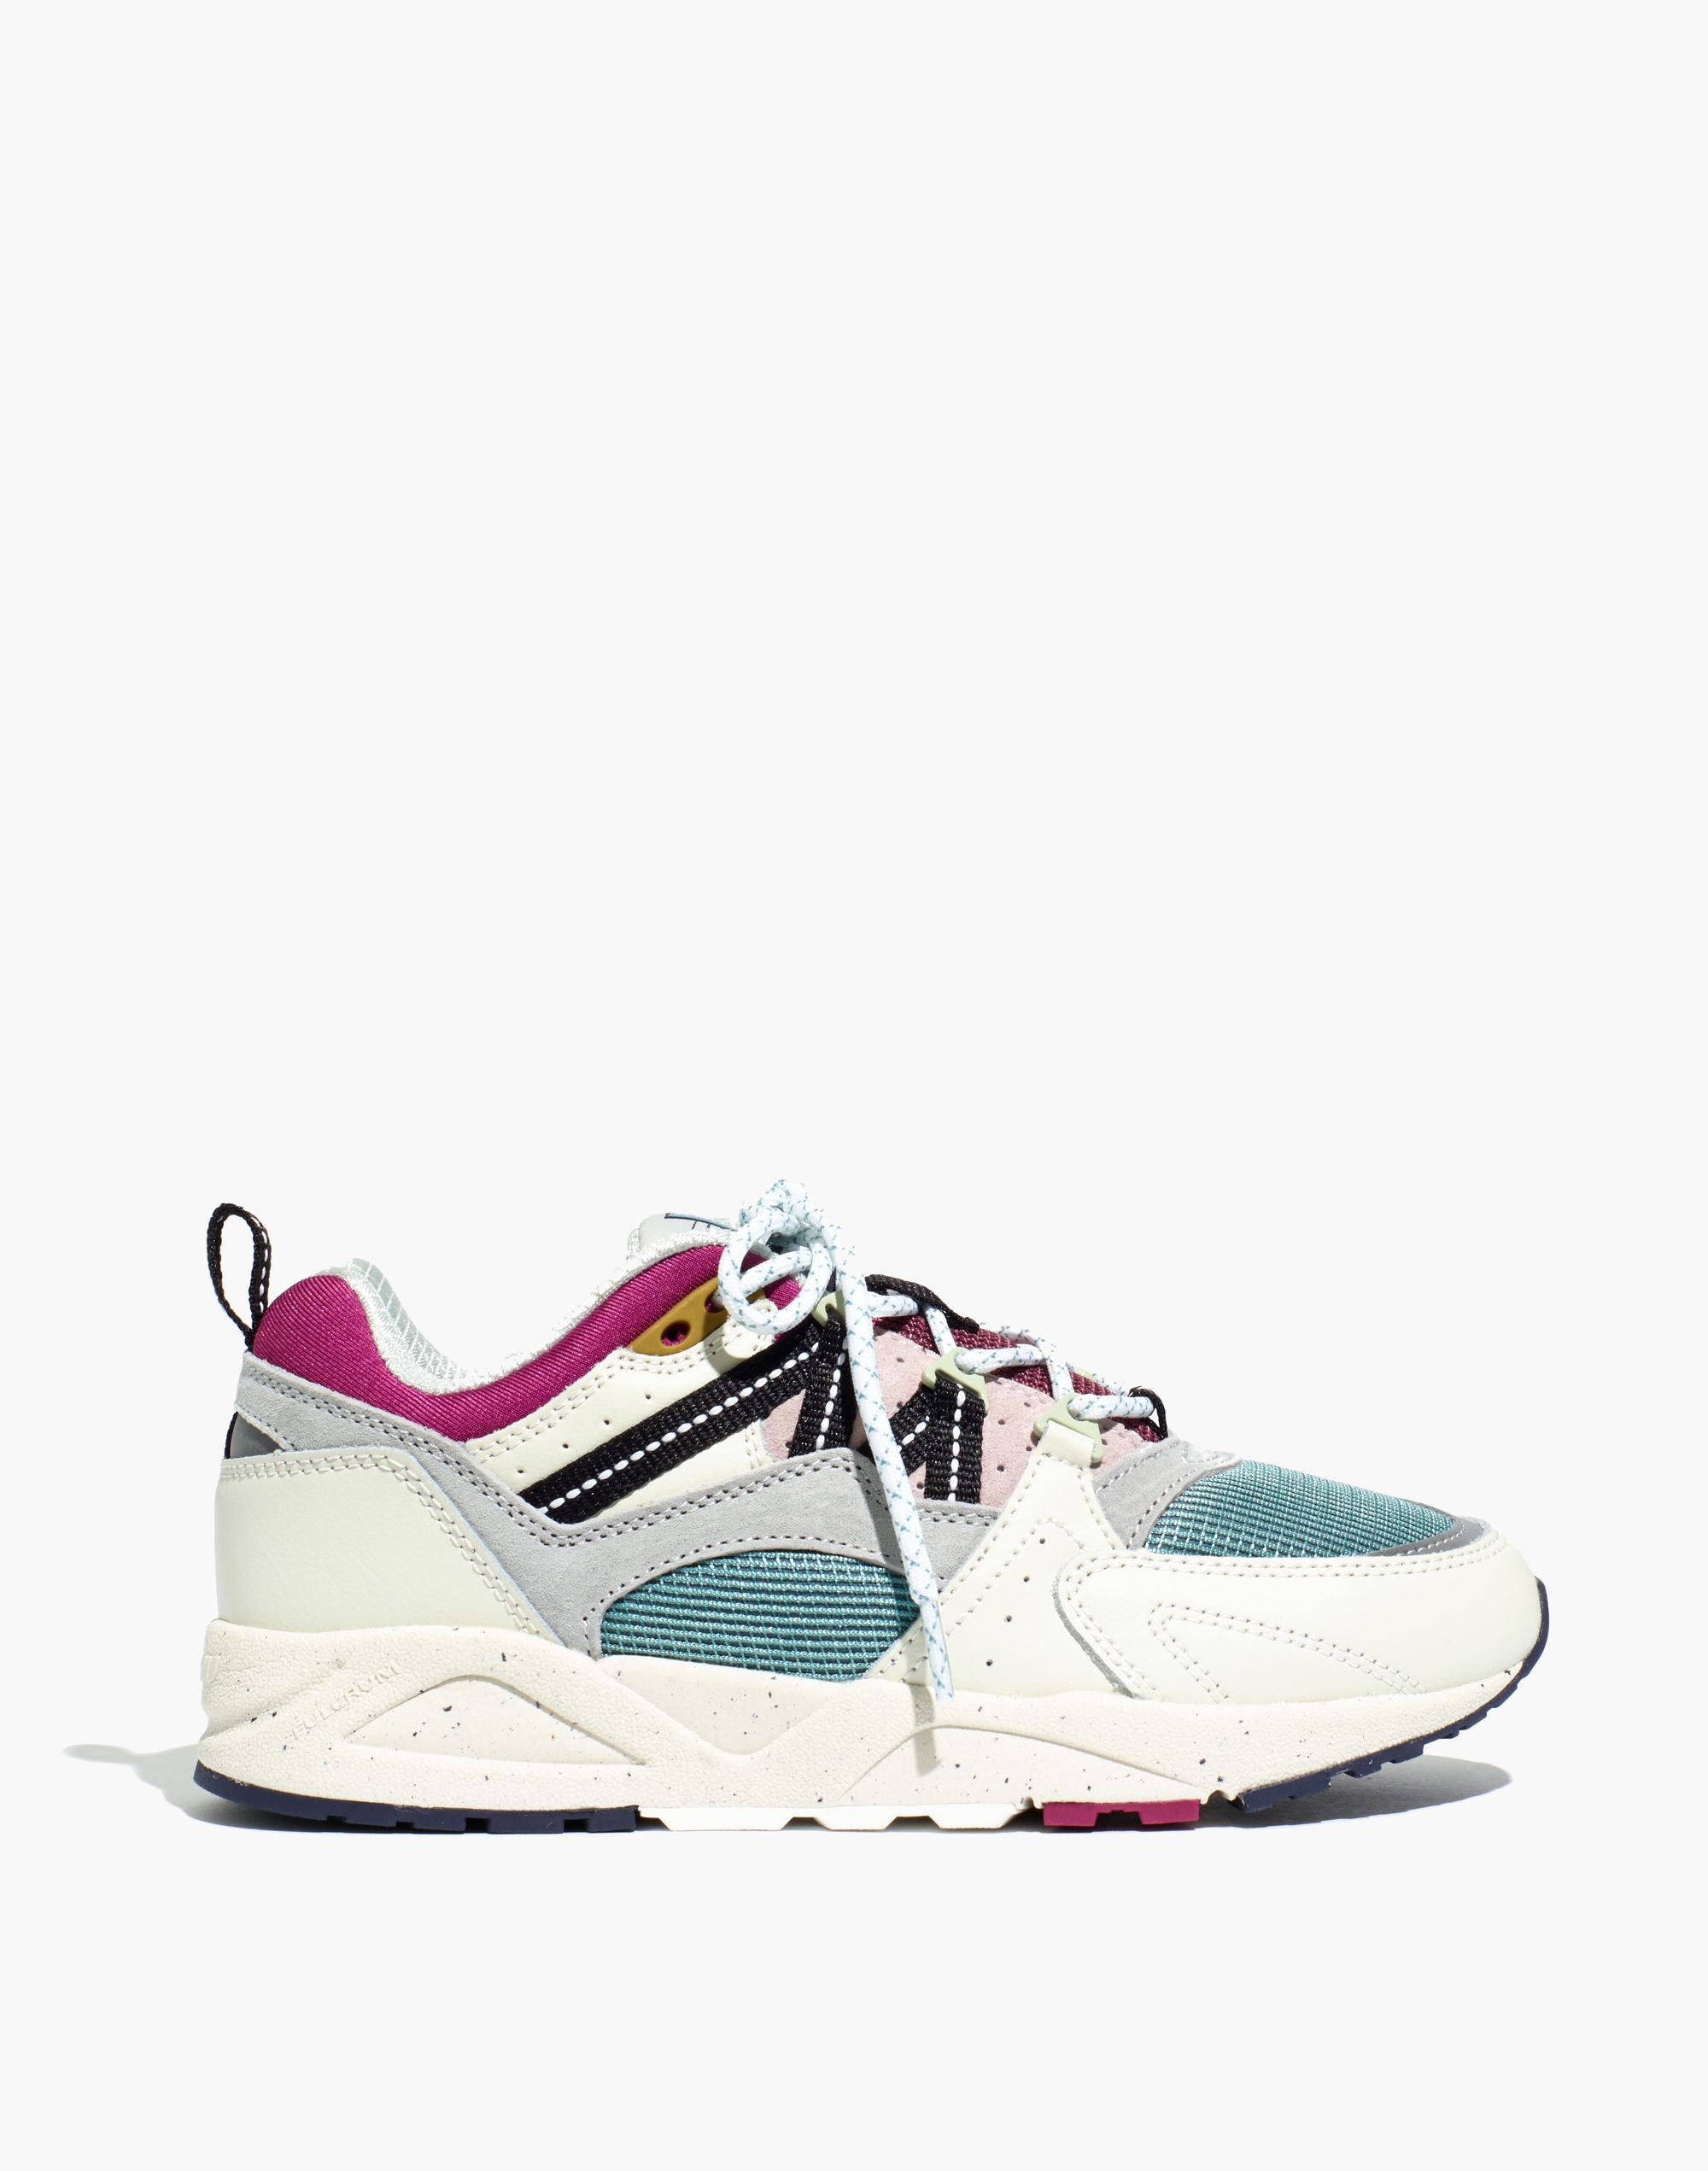 Karhu Unisex Suede Fusion 2.0 Lace-Up Sneakers